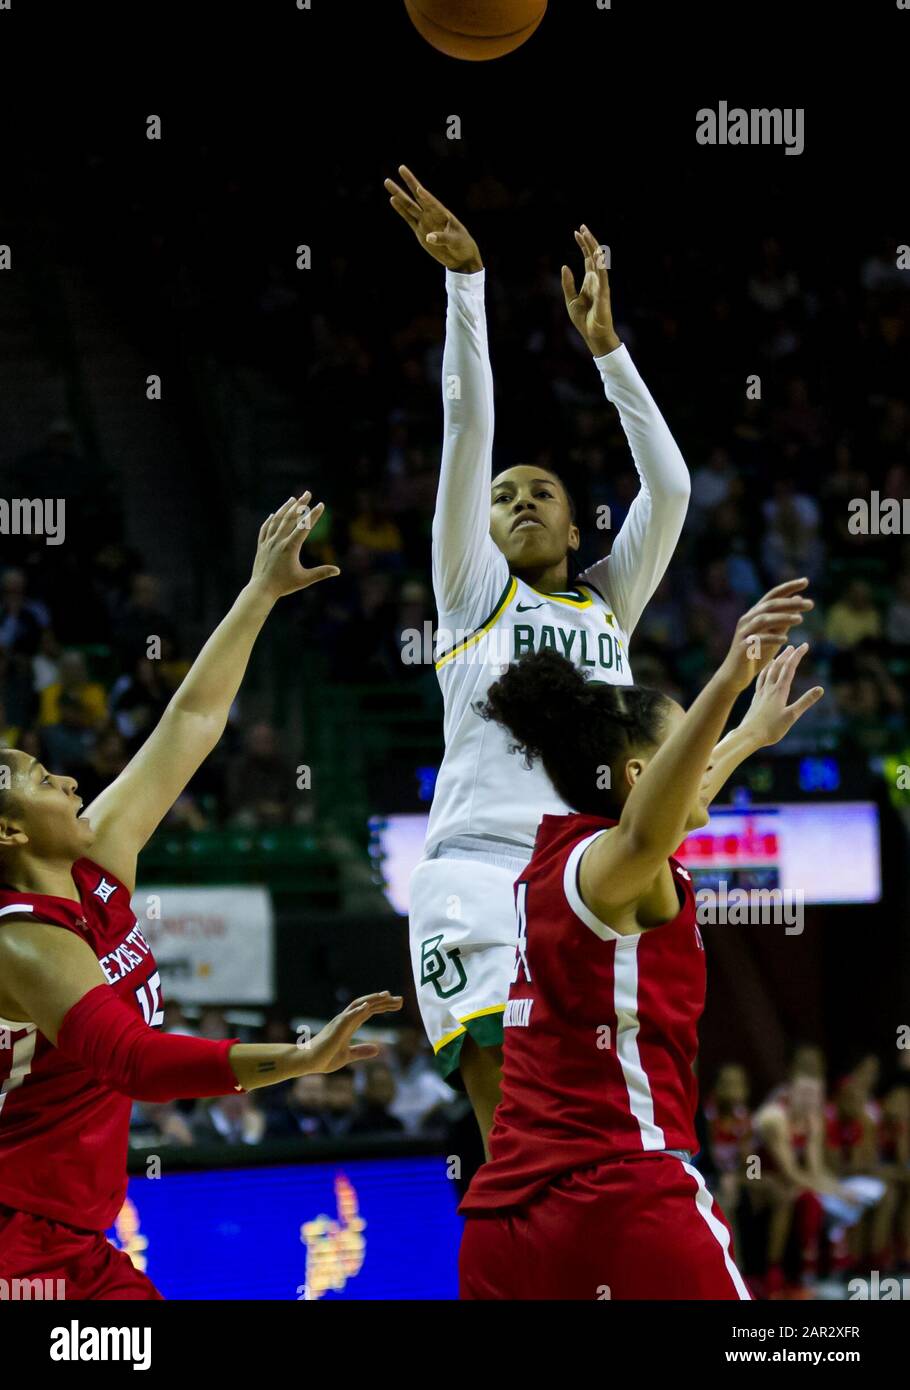 Waco, Texas, USA. 25th Jan, 2020. Baylor Lady Bears guard Juicy Landrum (20) shoots the ball during the 2nd half of the NCAA Women's Basketball game between Texas Tech Red Raiders and the Baylor Lady Bears at The Ferrell Center in Waco, Texas. Matthew Lynch/CSM/Alamy Live News Stock Photo